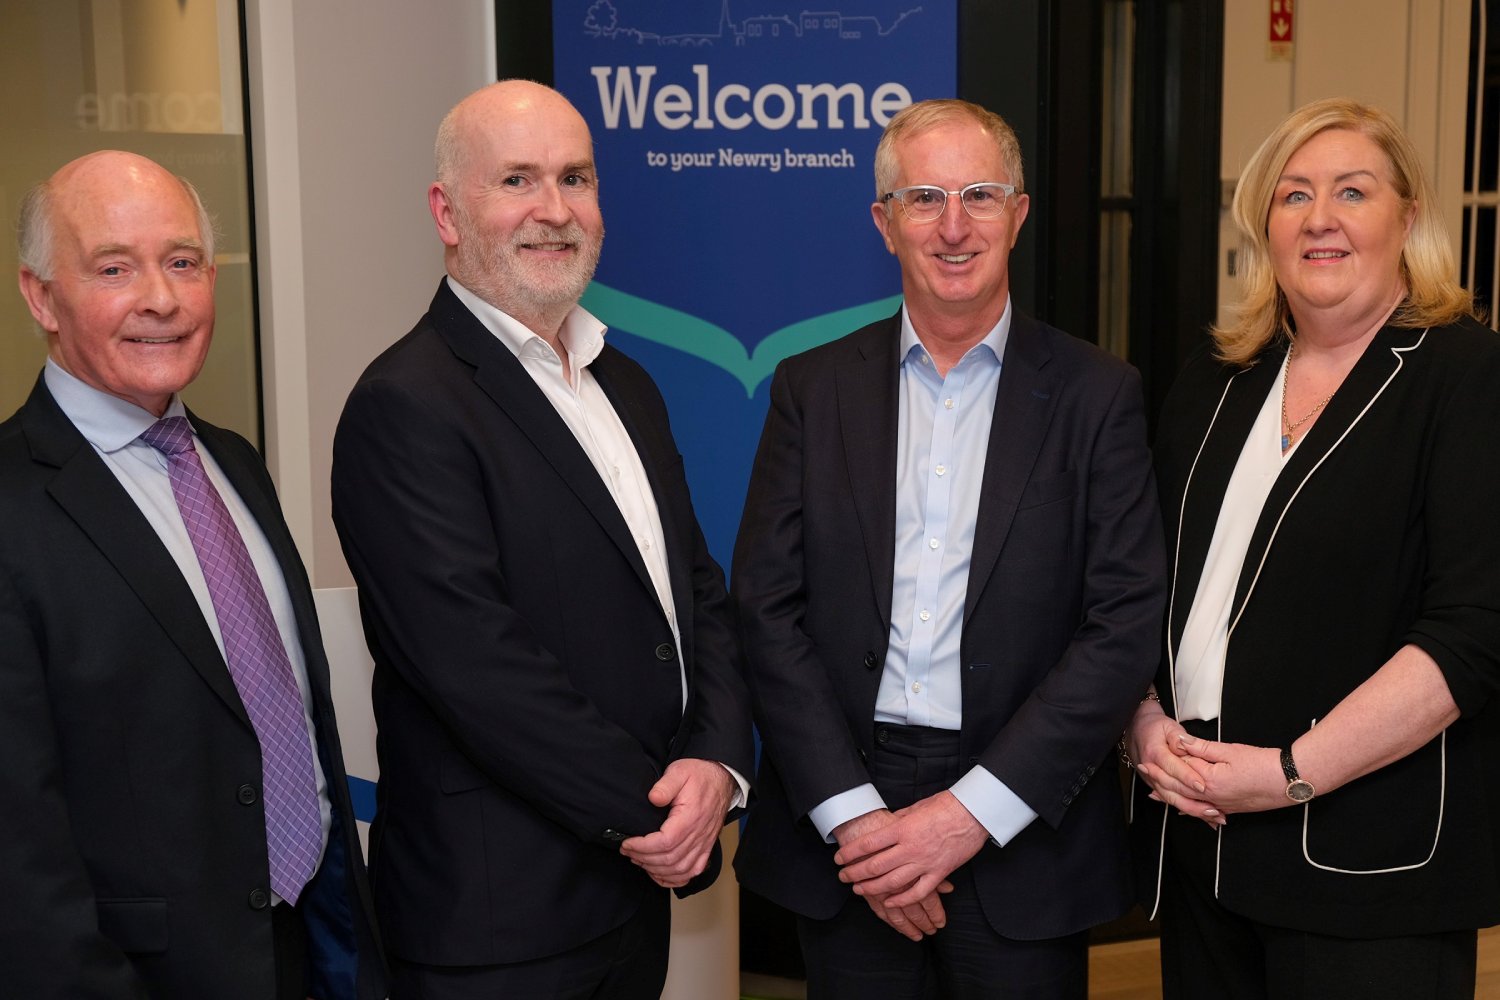 From left Peter Fitzsimmons, Warrenpoint Golf Club, Paul Slevin, Manager, Bank of Ireland, Newry, George Higginson, Director for NI Partnerships and Mortgages, Bank of Ireland and Jacinta Linden, Bolster Community